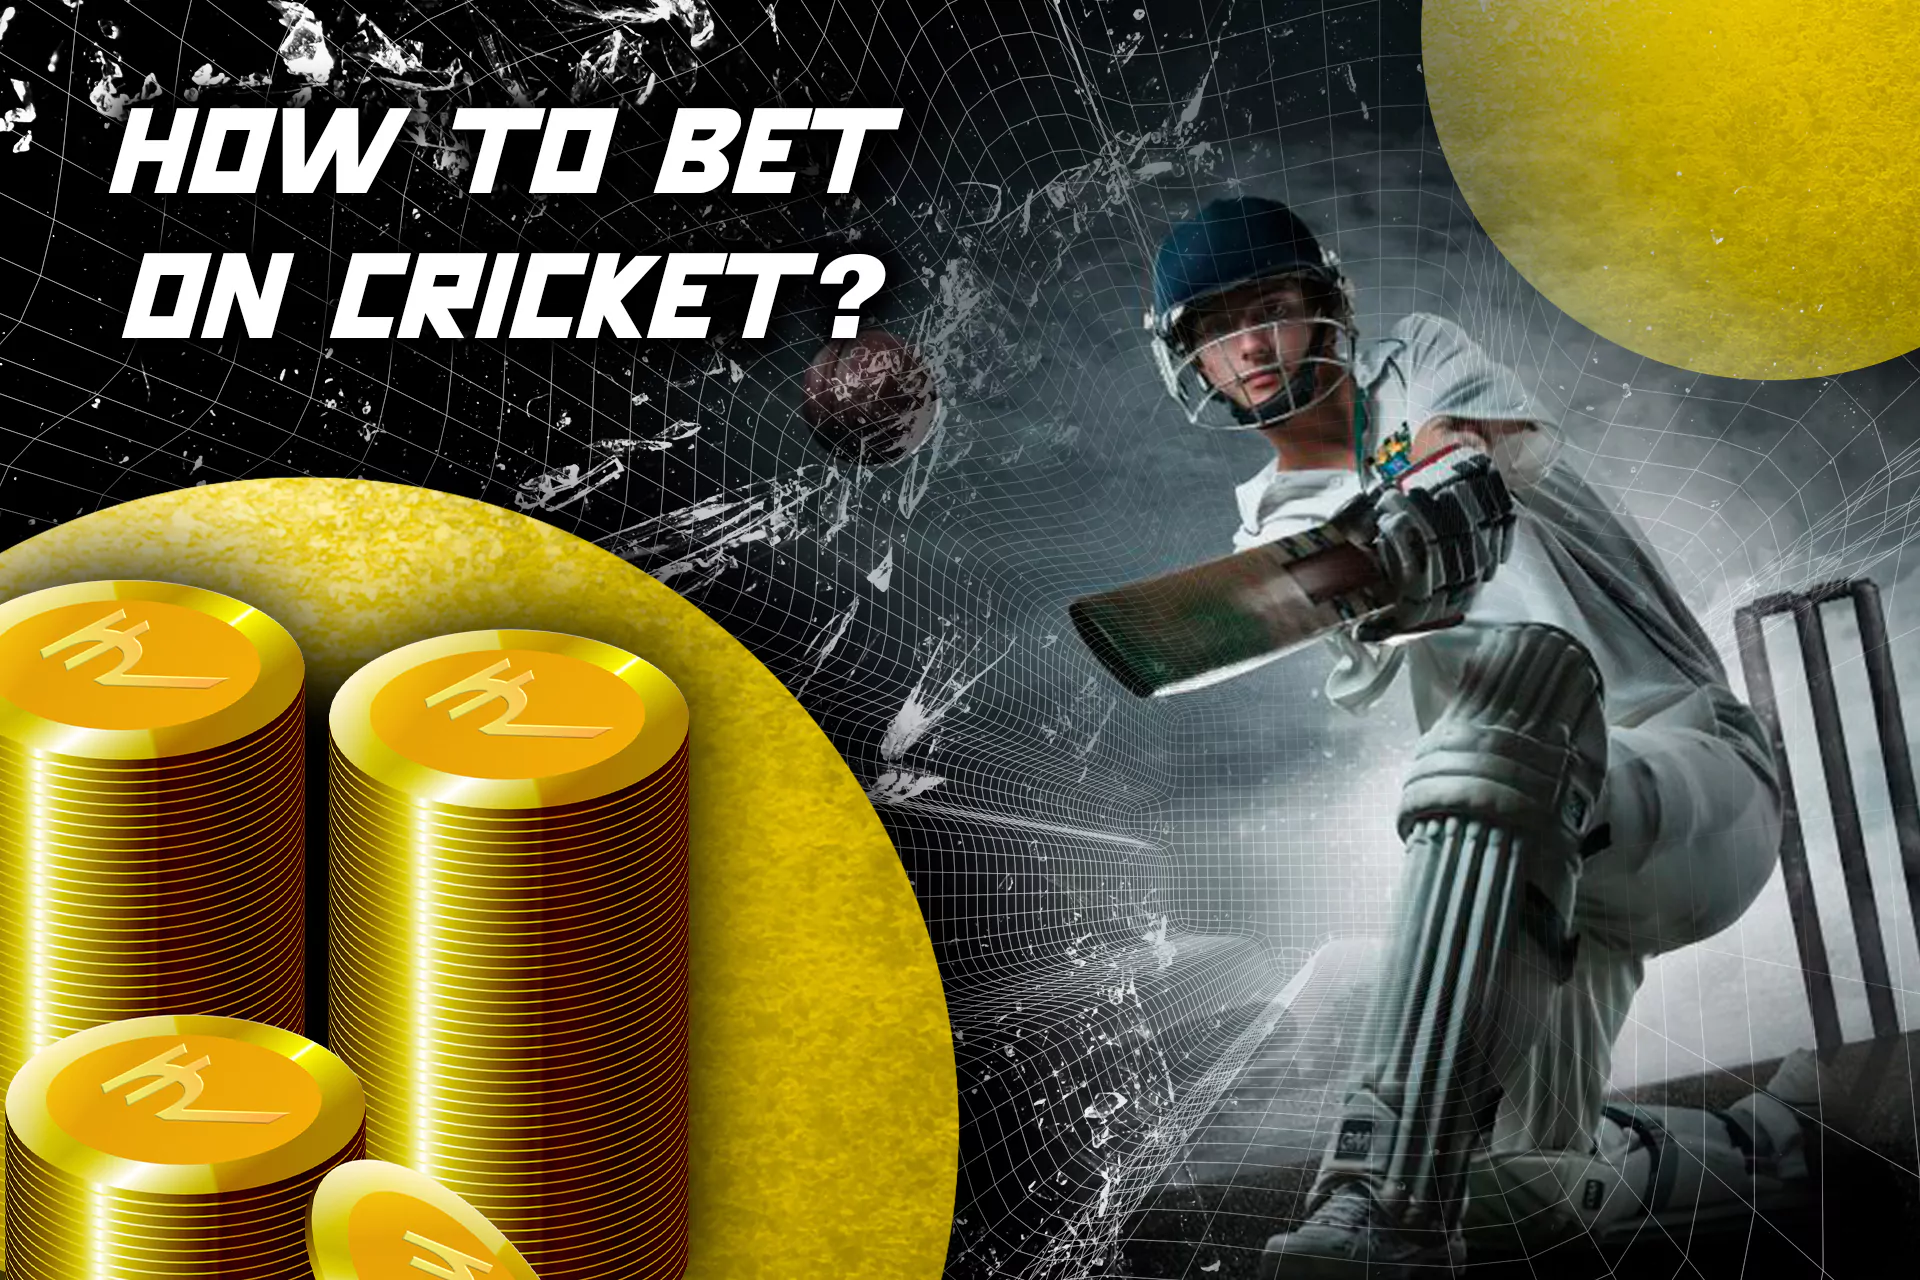 Follow our instructions in order to place your first bet on cricket.